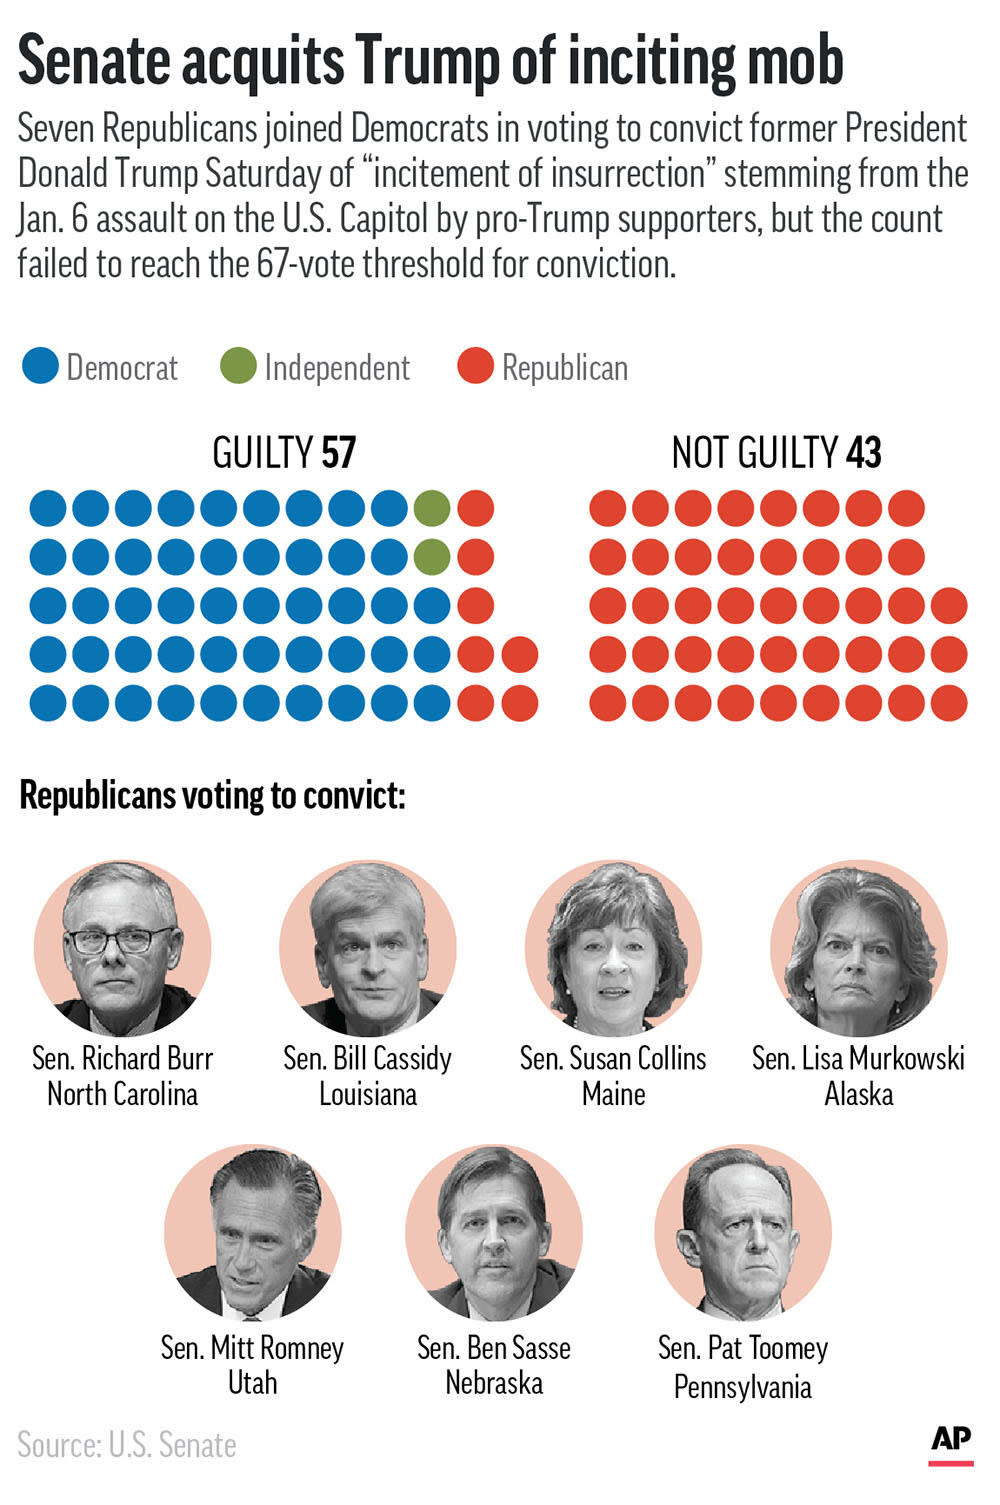 Former President Donald Trump was acquitted Saturday in his Senate impeachment trial for inciting a mob to assault the U.S. Capitol in January. Seven Republicans voted with Democrats to convict him. (AP Graphic)